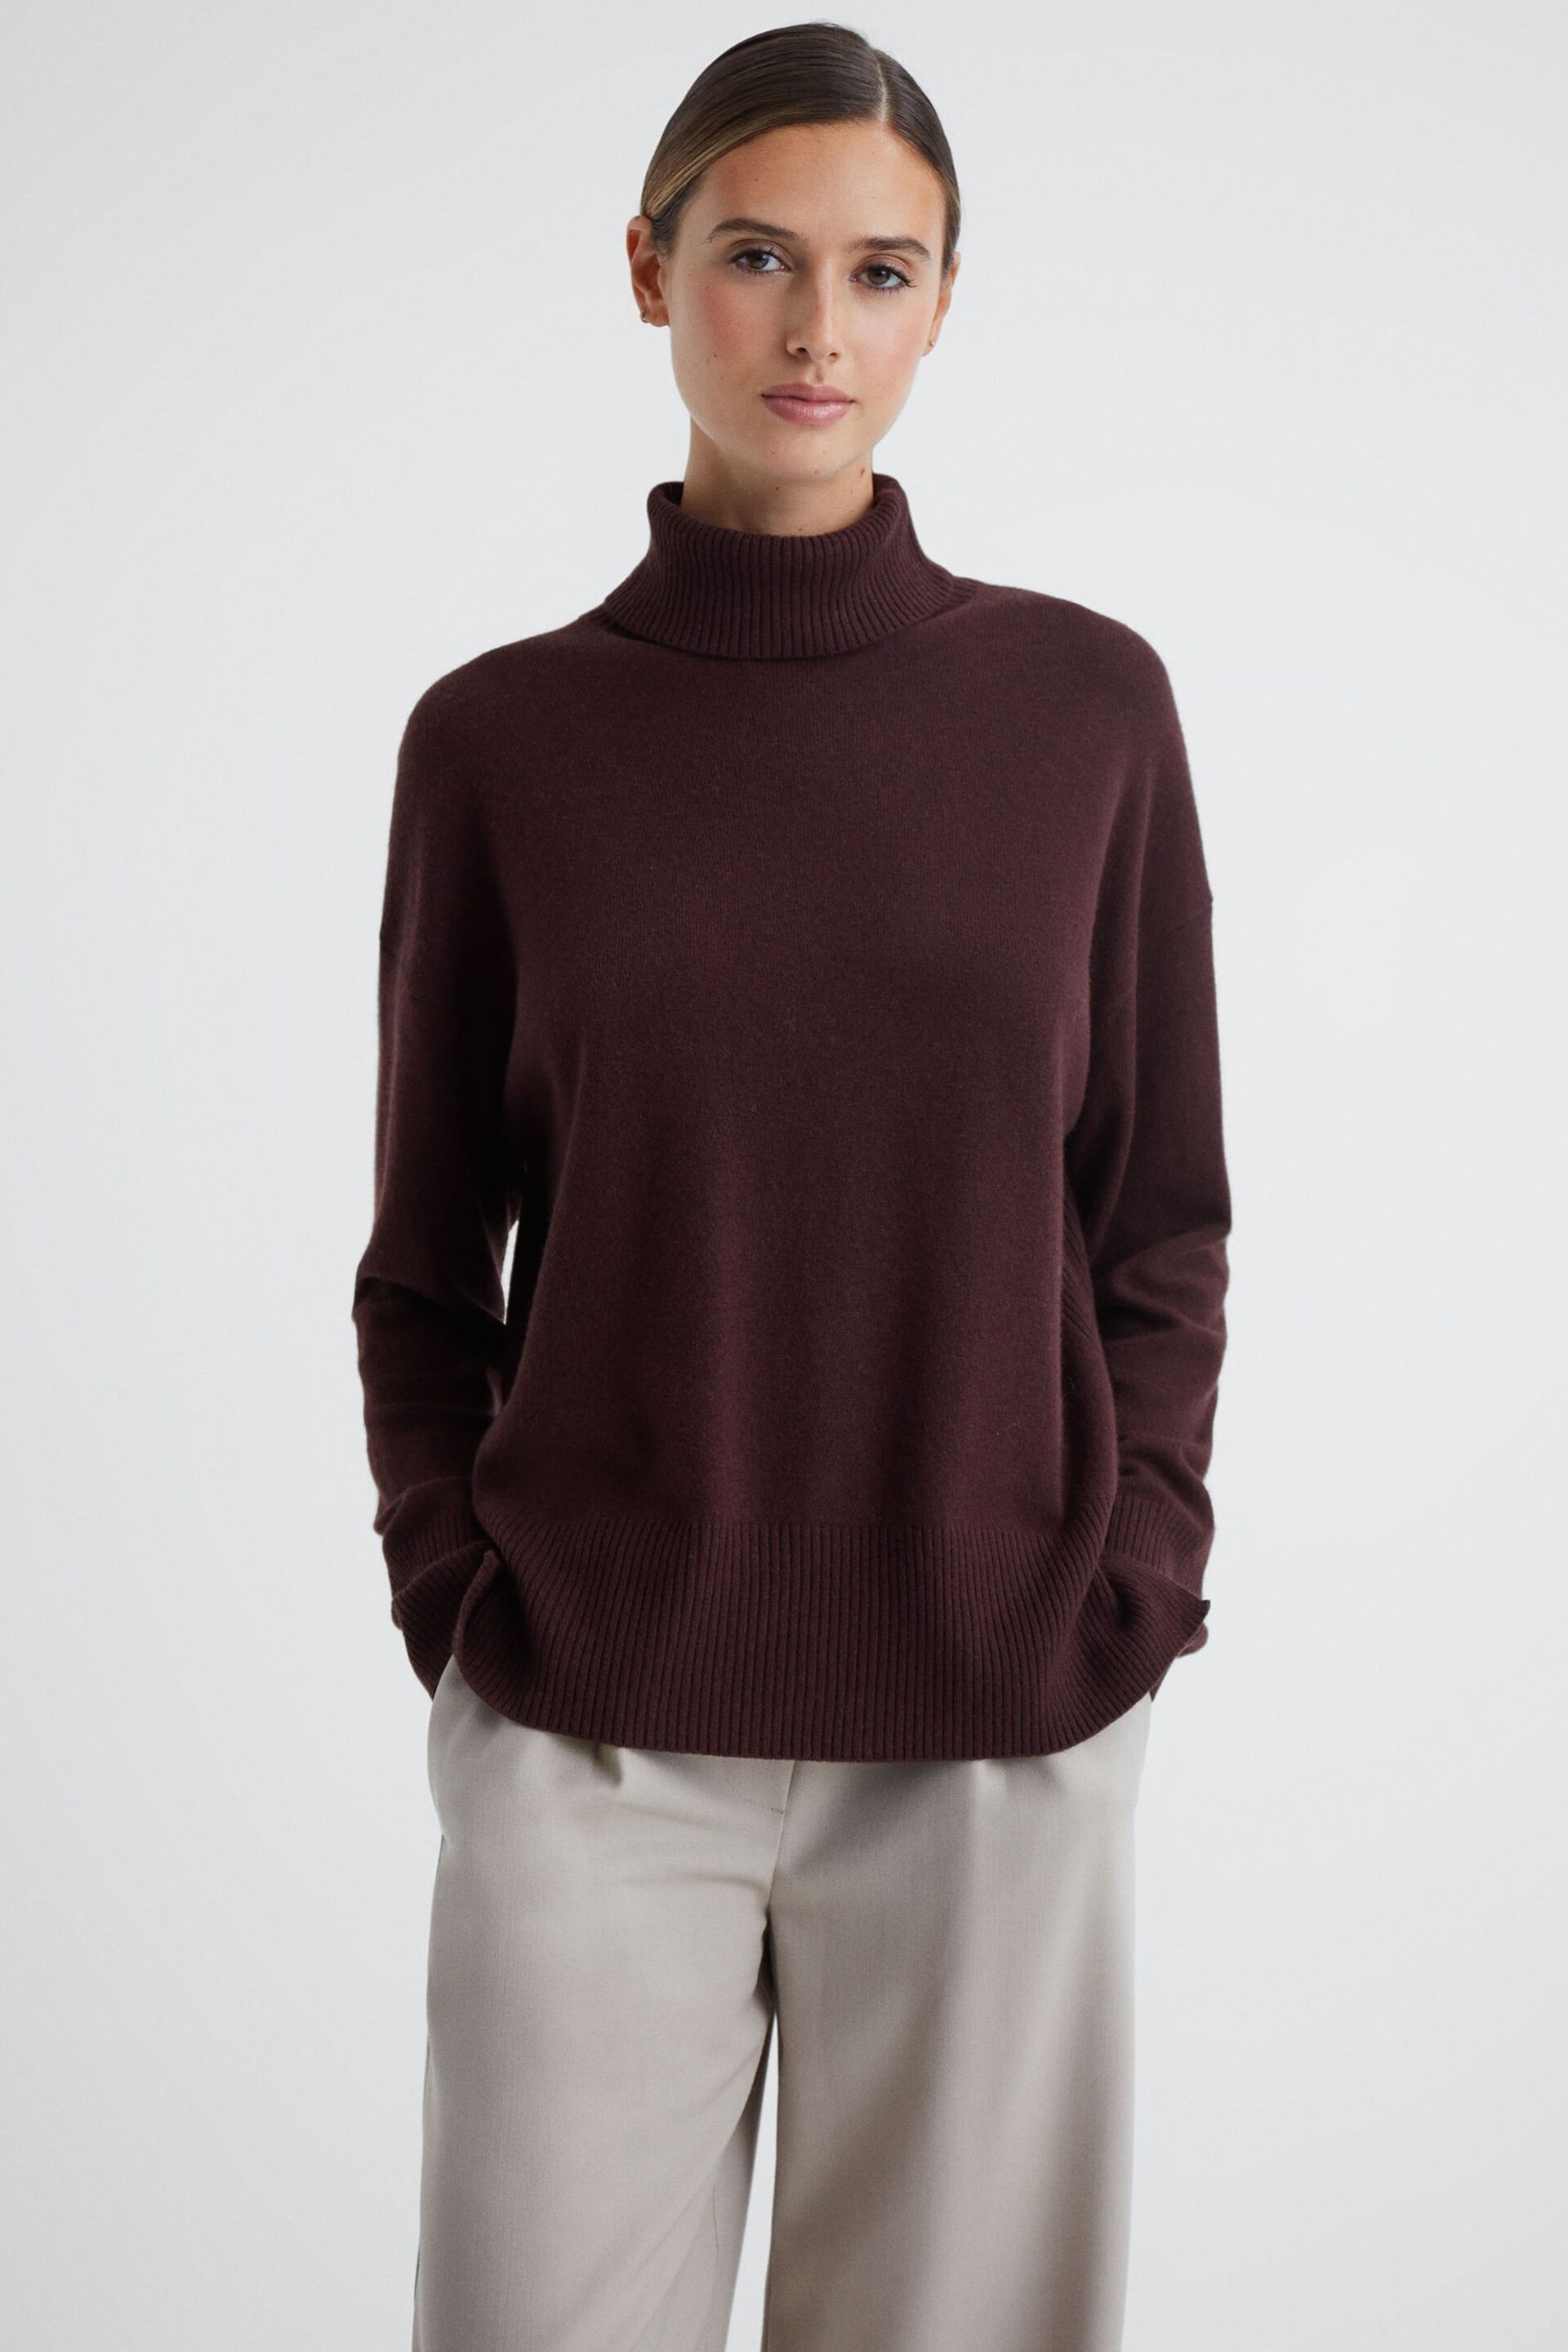 Reiss Berry Alexis Wool Blend Roll Neck Jumper - Image 1 of 5